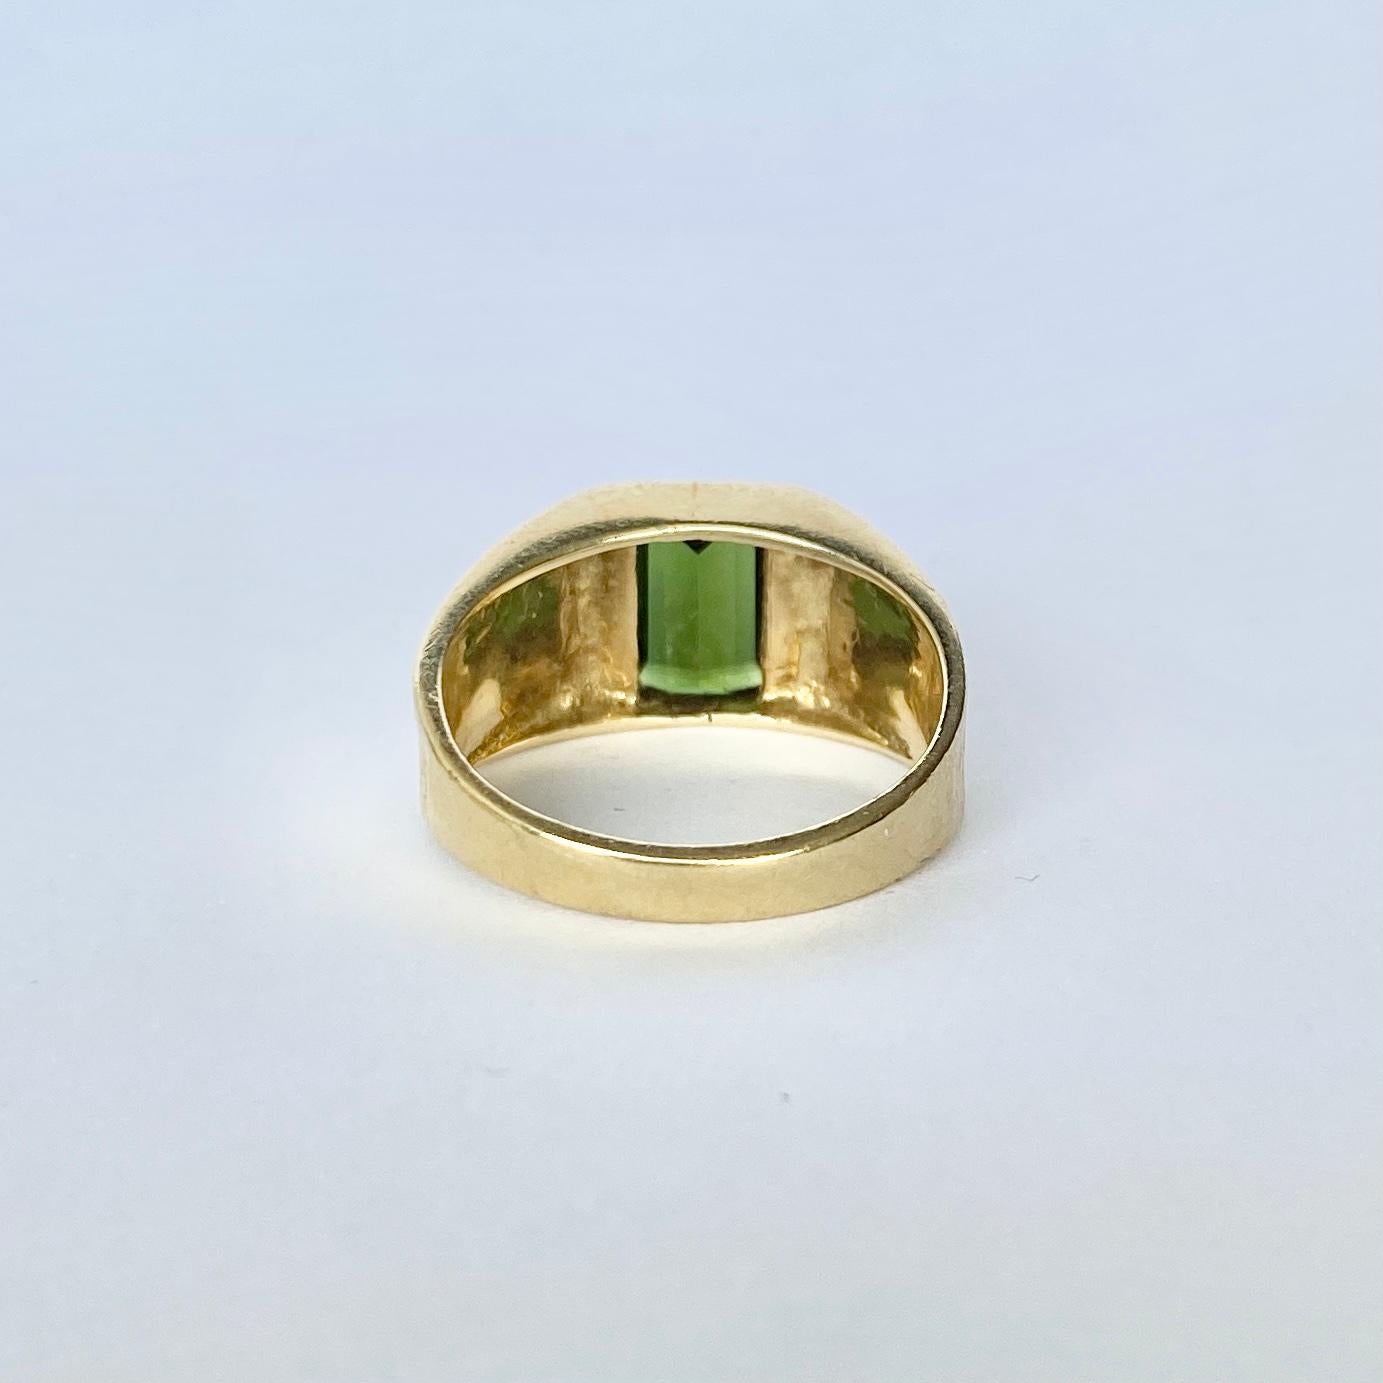 Emerald Cut Vintage Tourmaline and 9 Carat Gold Ring